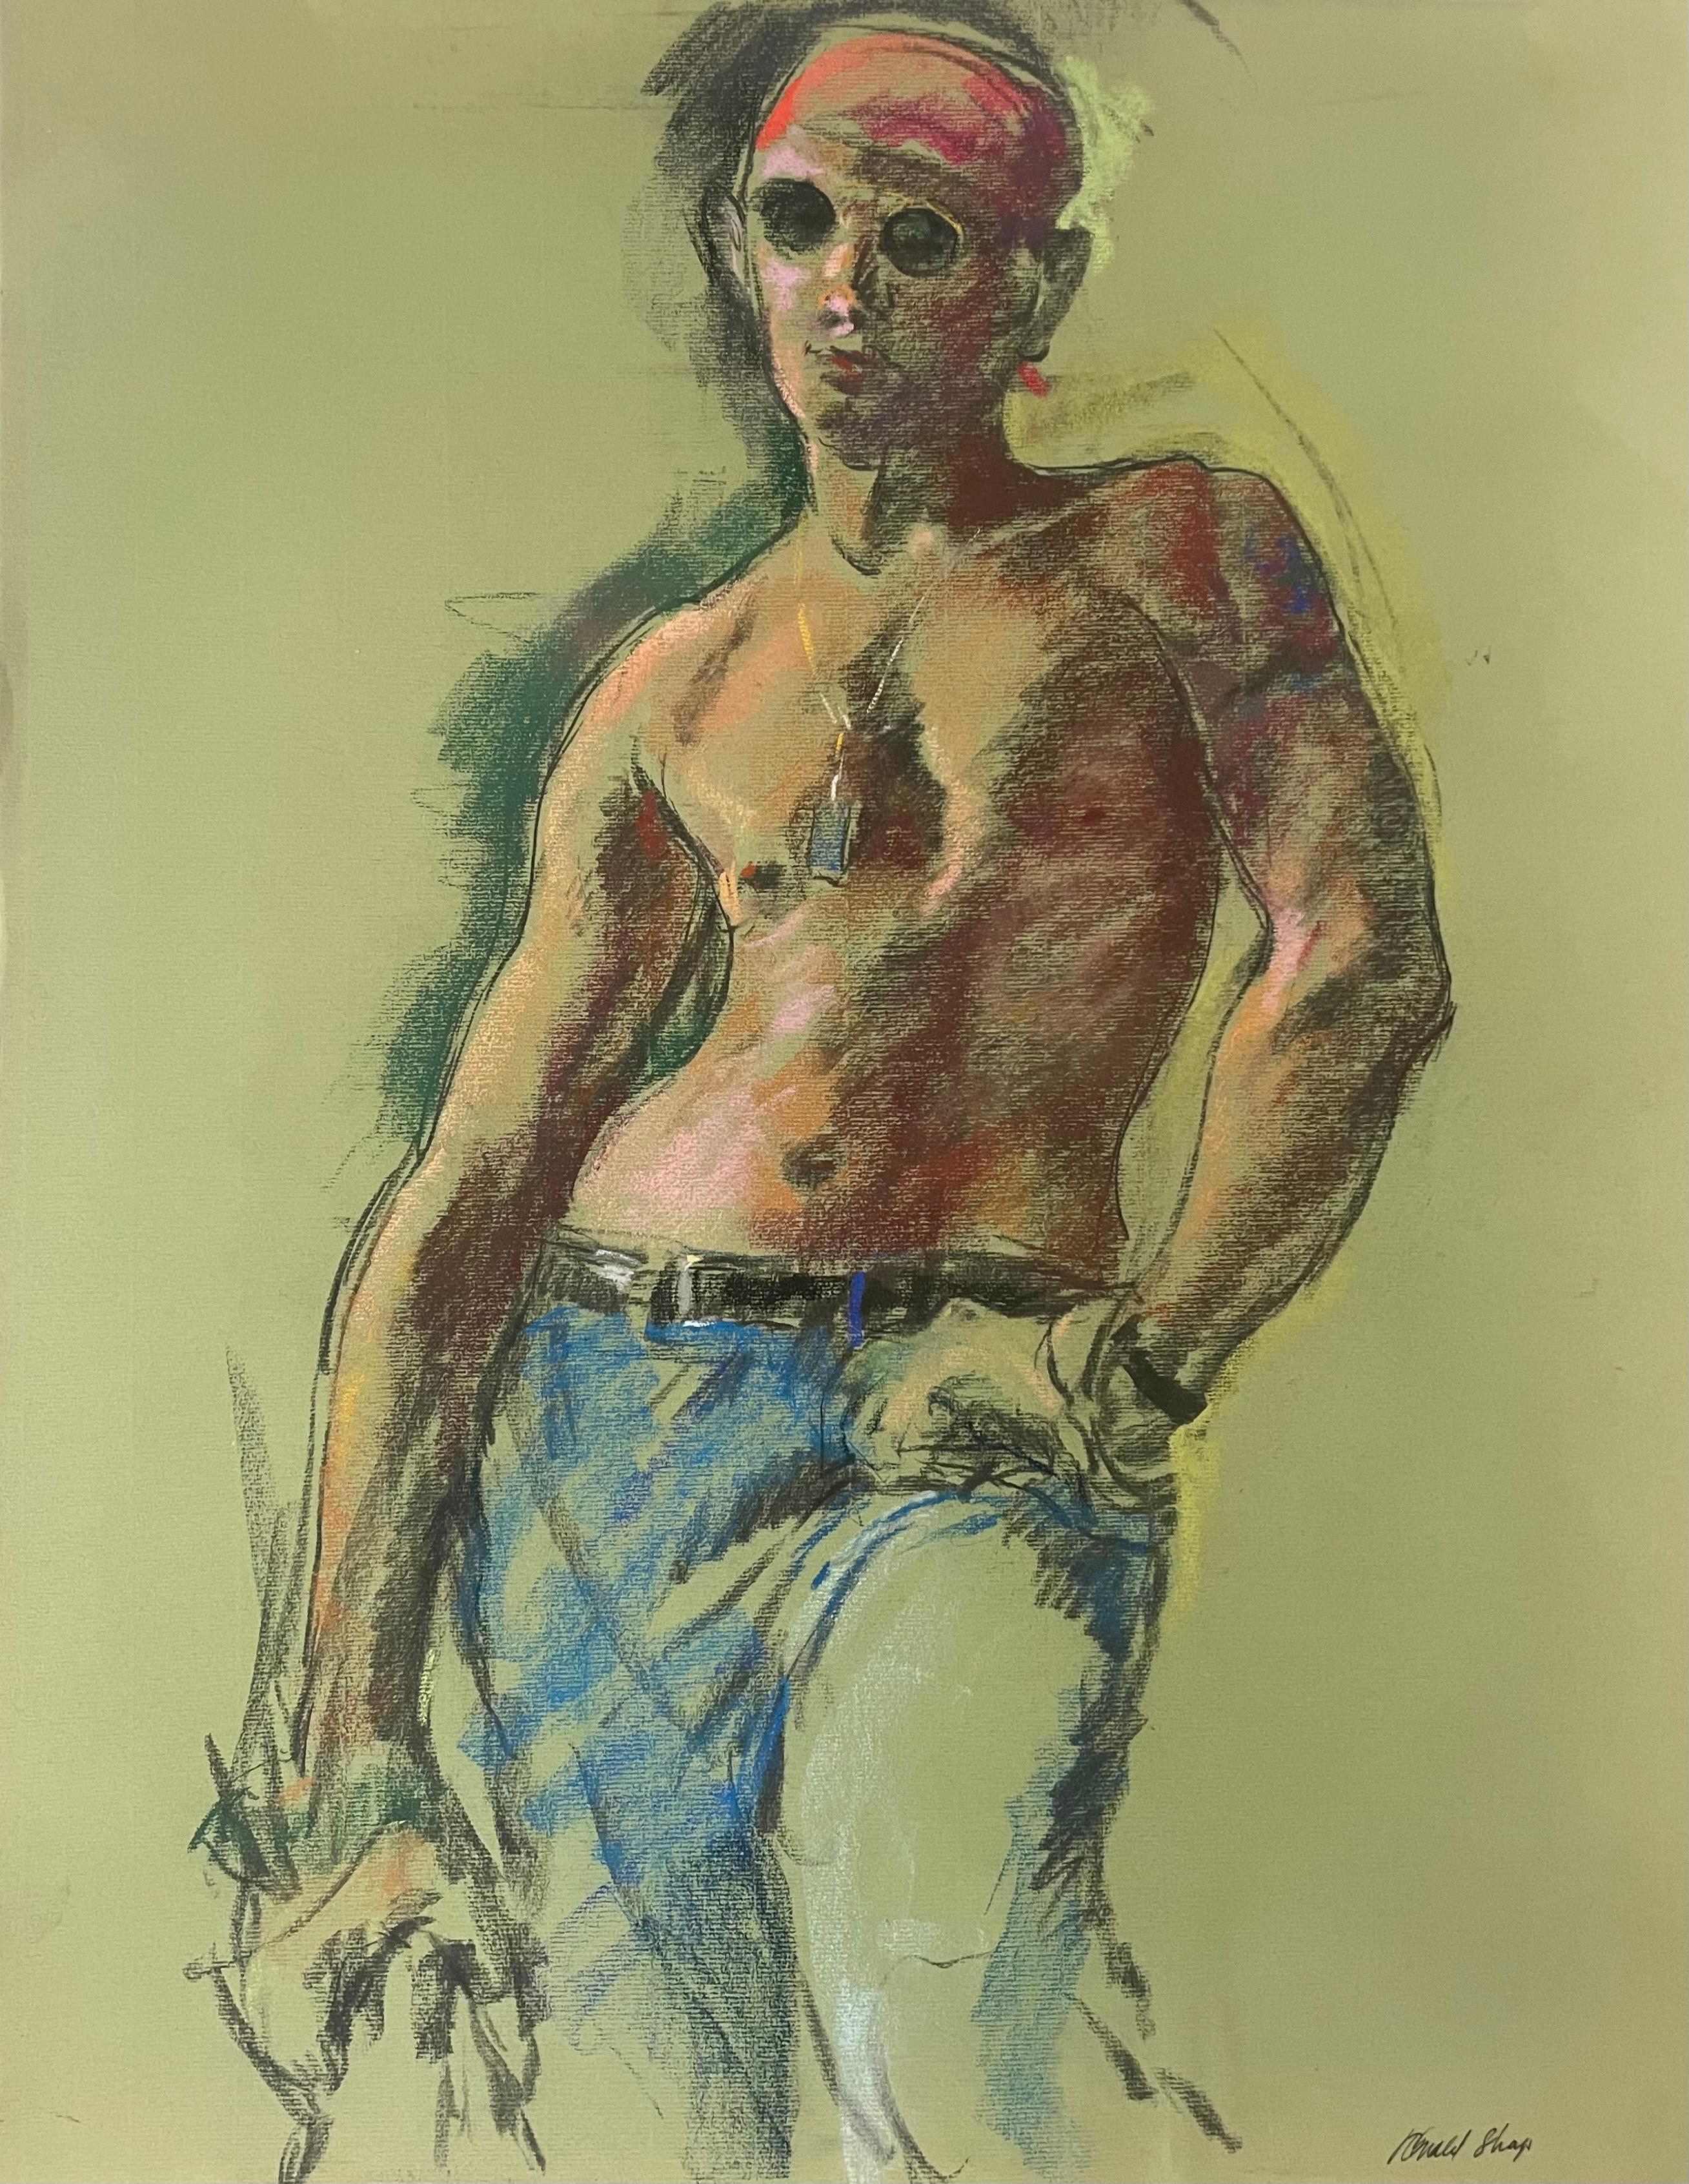 Original oil pastel and gouache figure drawing by celebrated, twentieth-century California landscape painter, Ronald Shap. Sketch of a shirtless man in sunglasses and jeans on pea-green colored paper. 25.5x19.5 inches. Signed. 

Creasing along